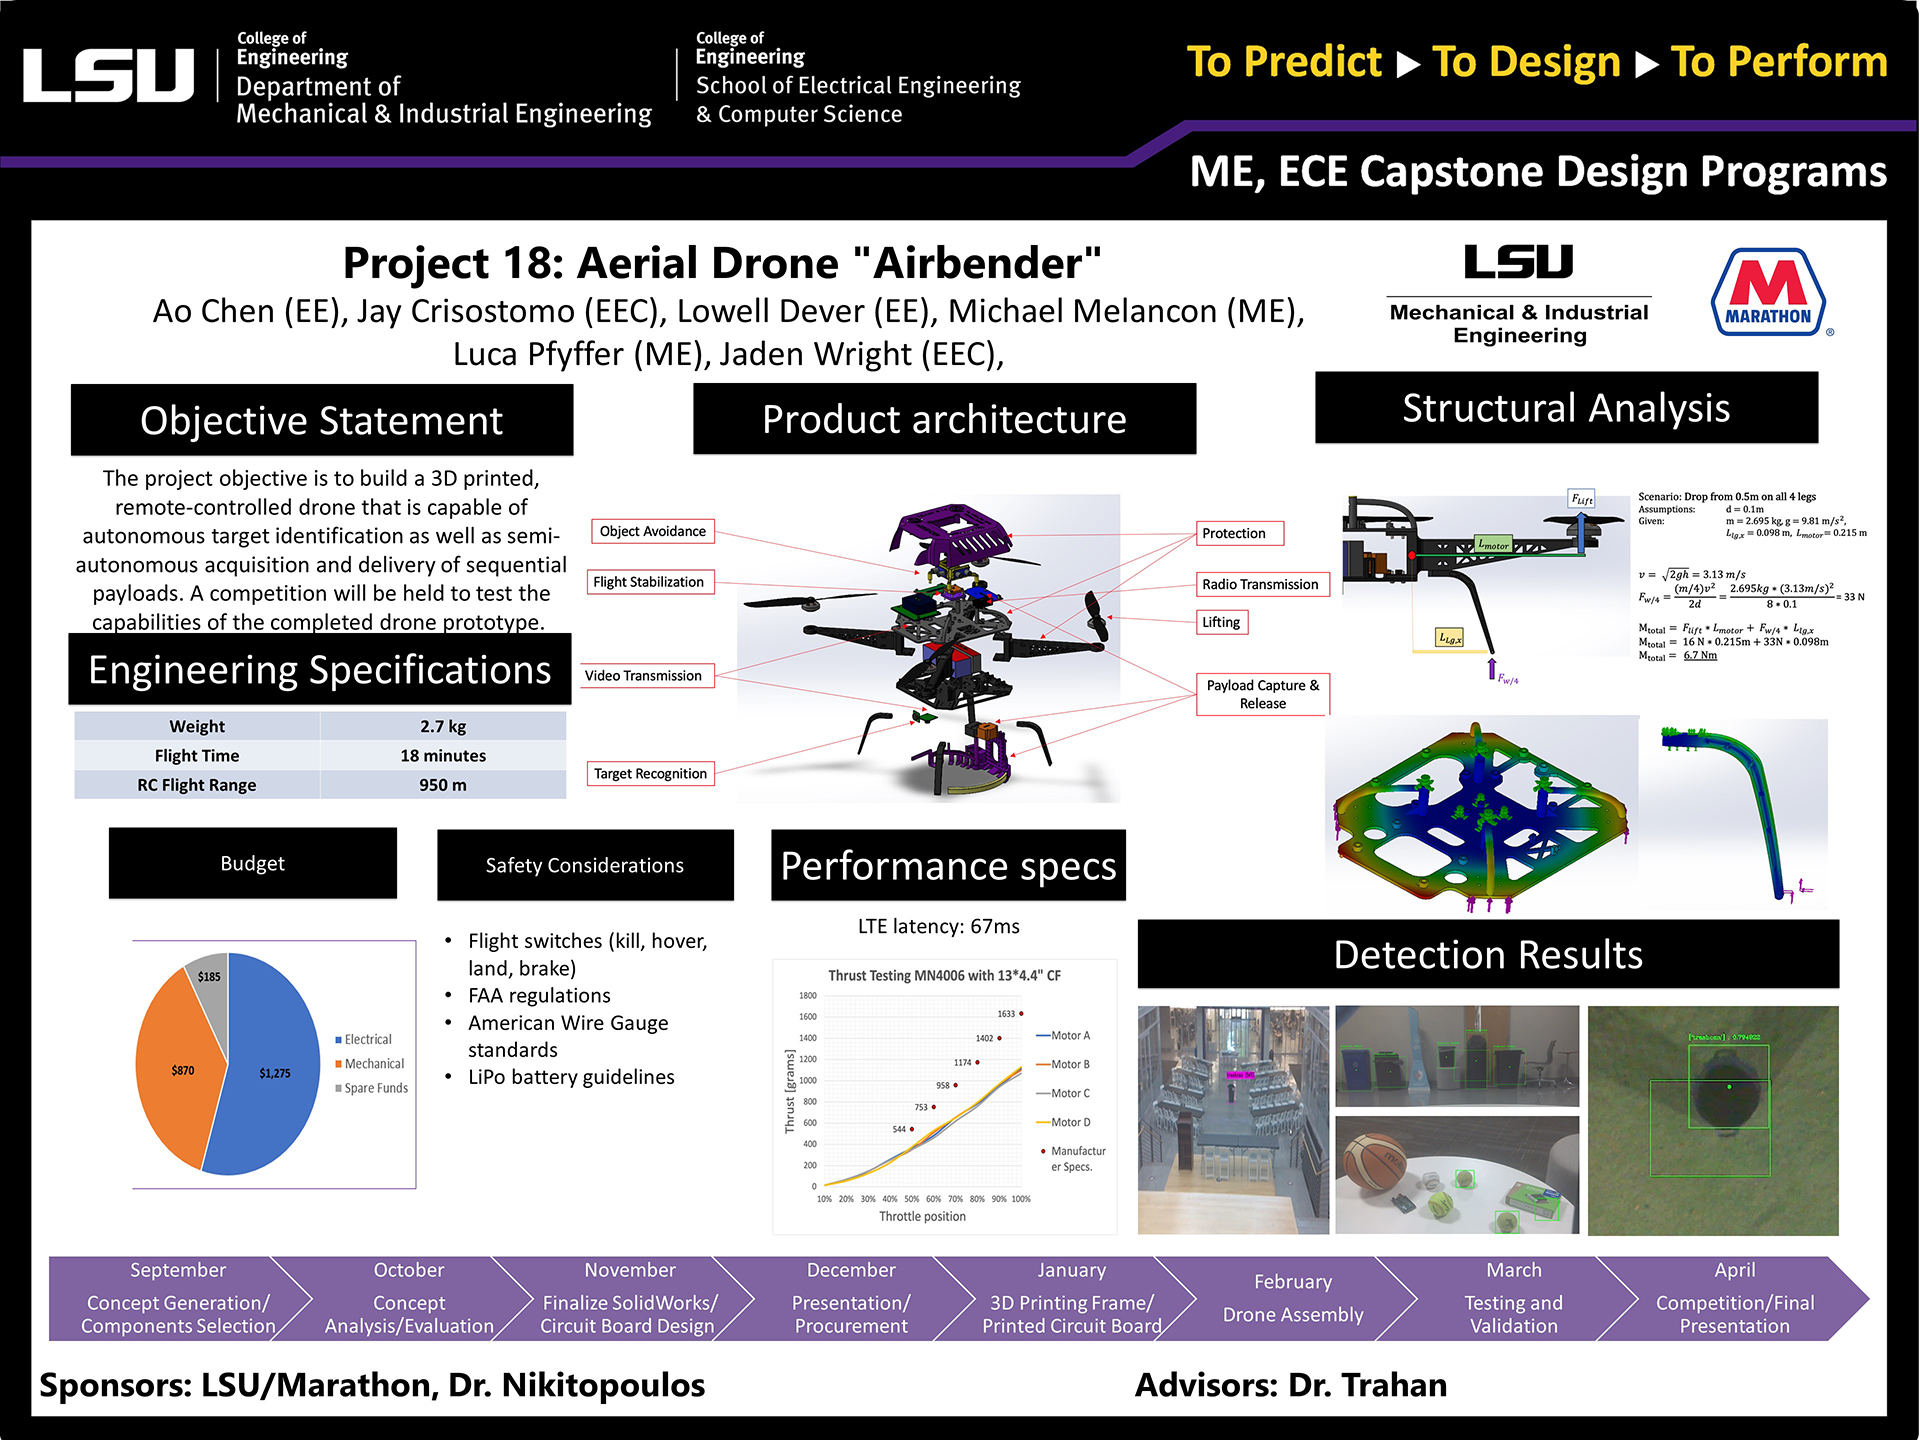 Project 18: Aerial Drone "Airbender"